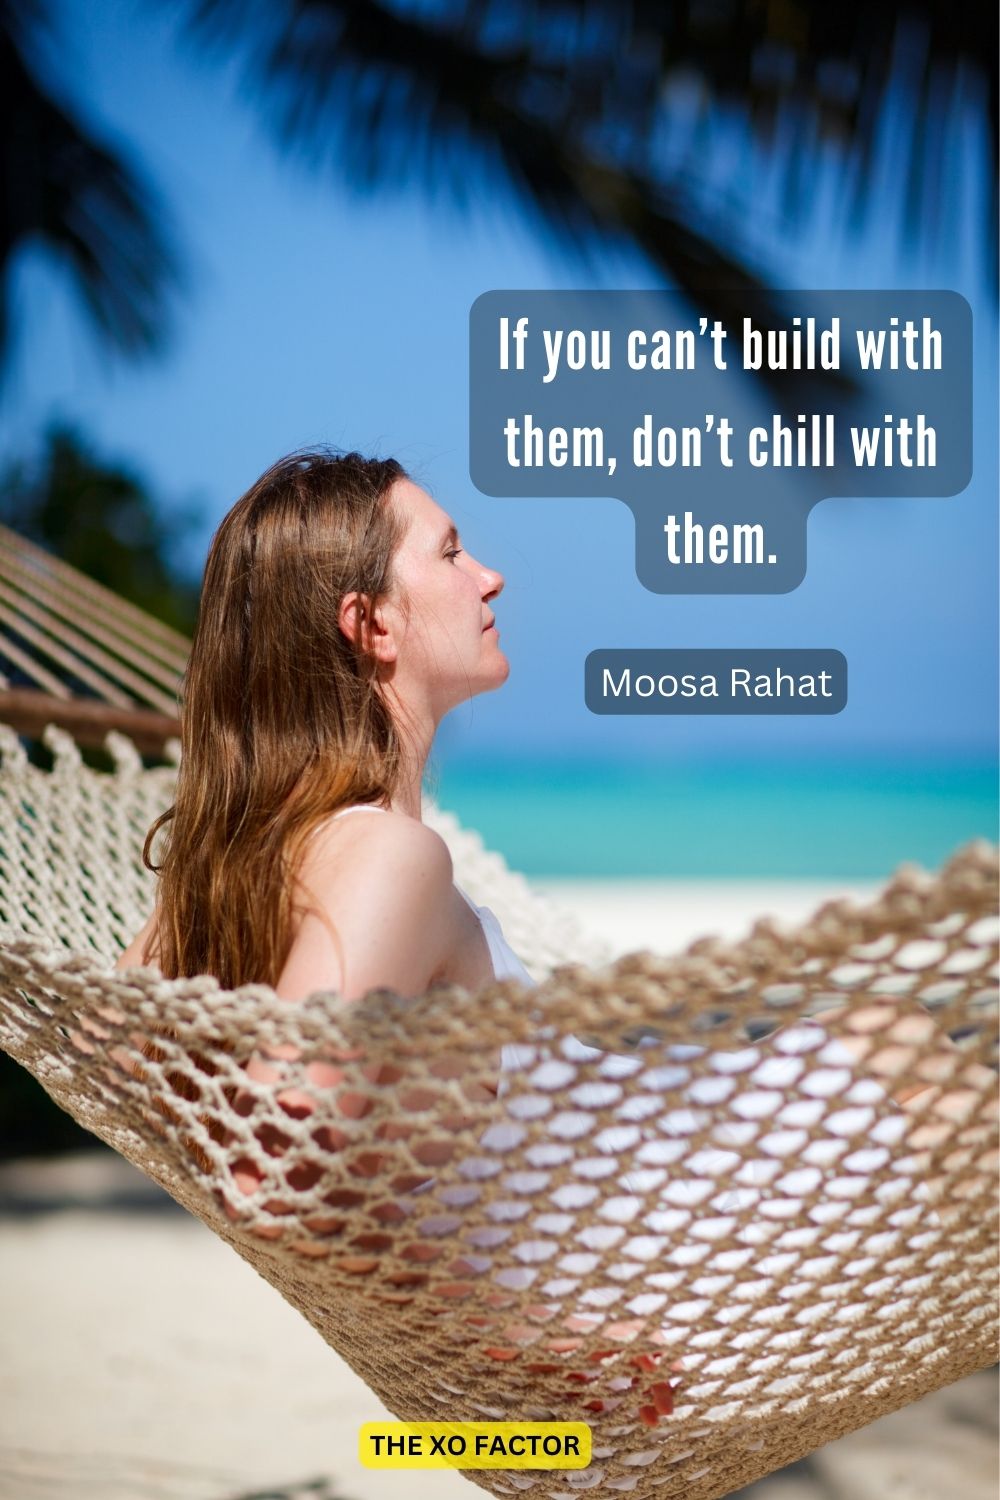 If you can’t build with them, don’t chill with them.
Moosa Rahat